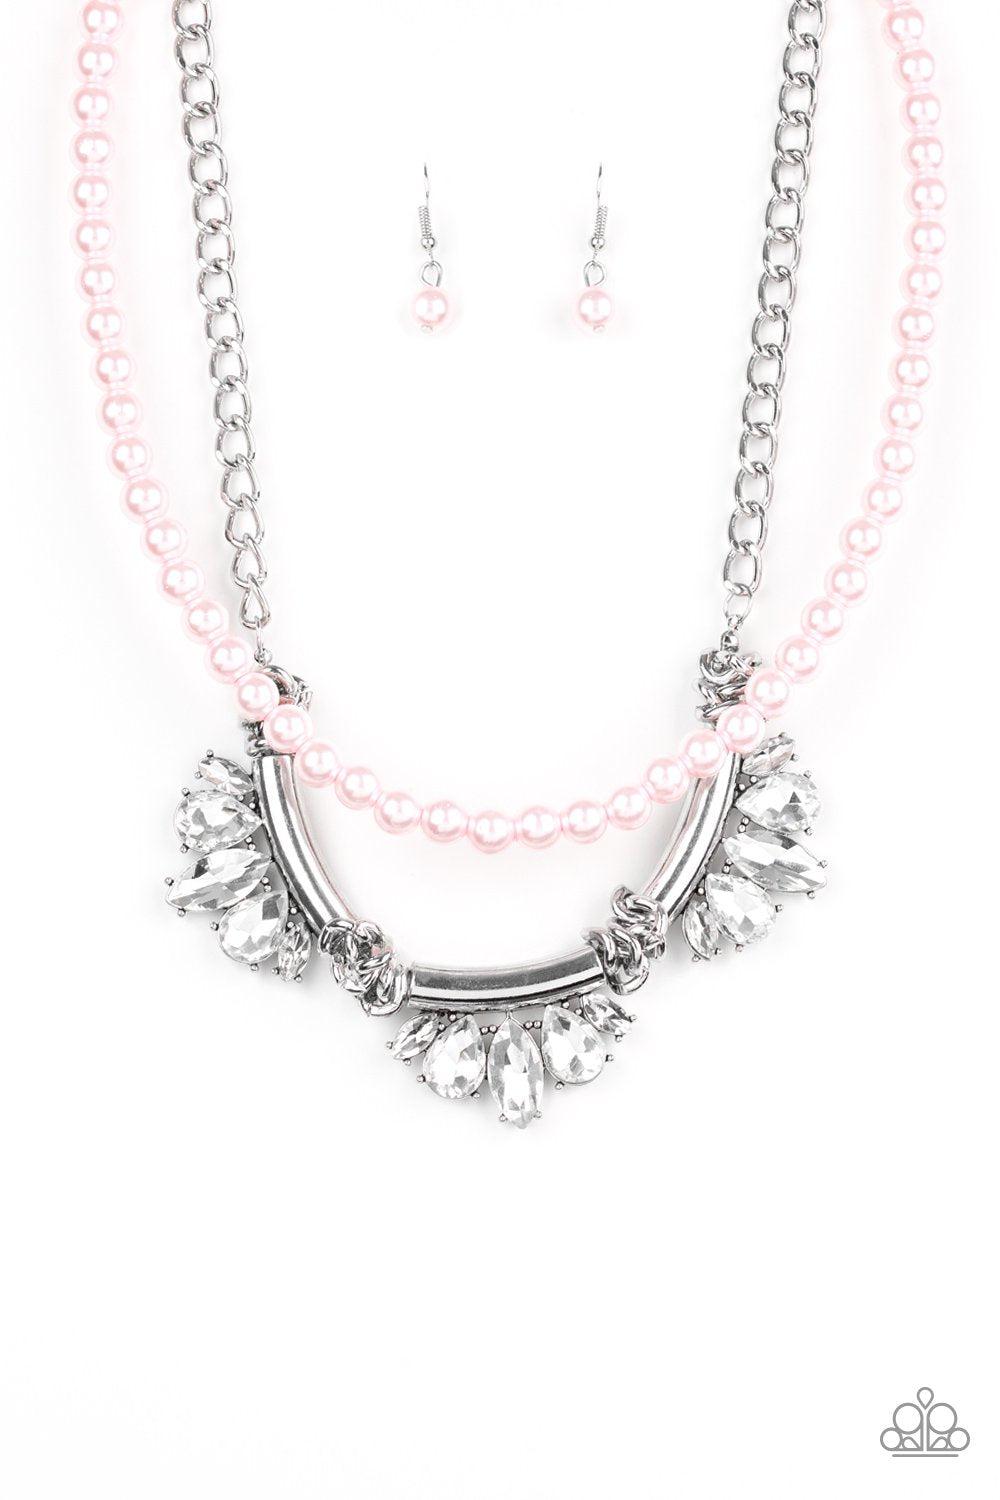 Bow Before the Queen Pink Pearl Necklace - Paparazzi Accessories-CarasShop.com - $5 Jewelry by Cara Jewels